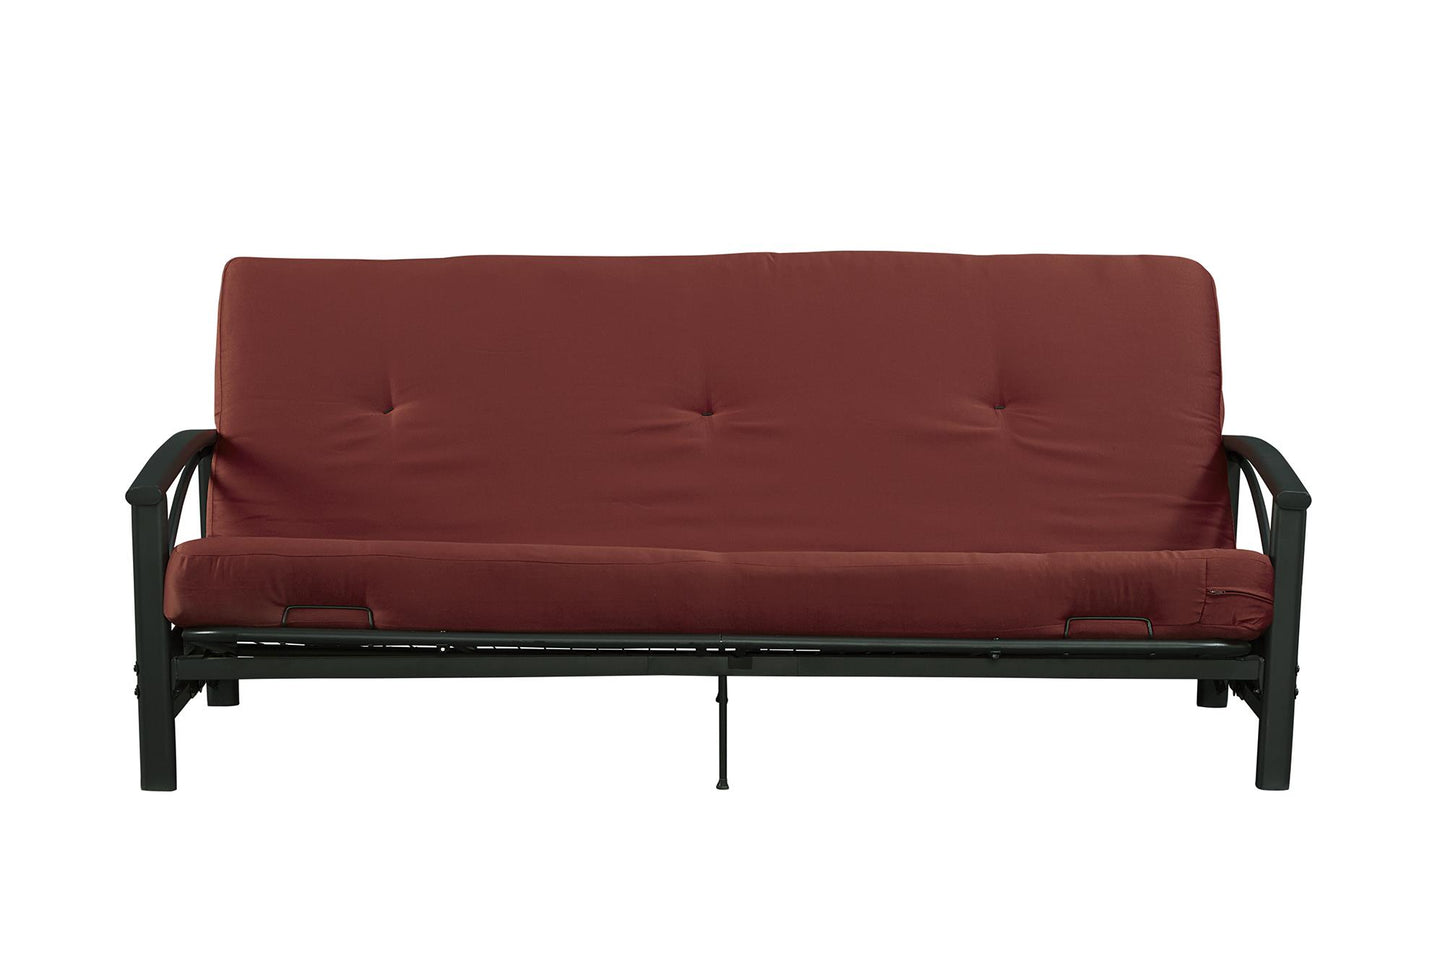 Carson 6 Inch Thermobonded High Density Polyester Fill Futon Mattress - Ruby Red - Full